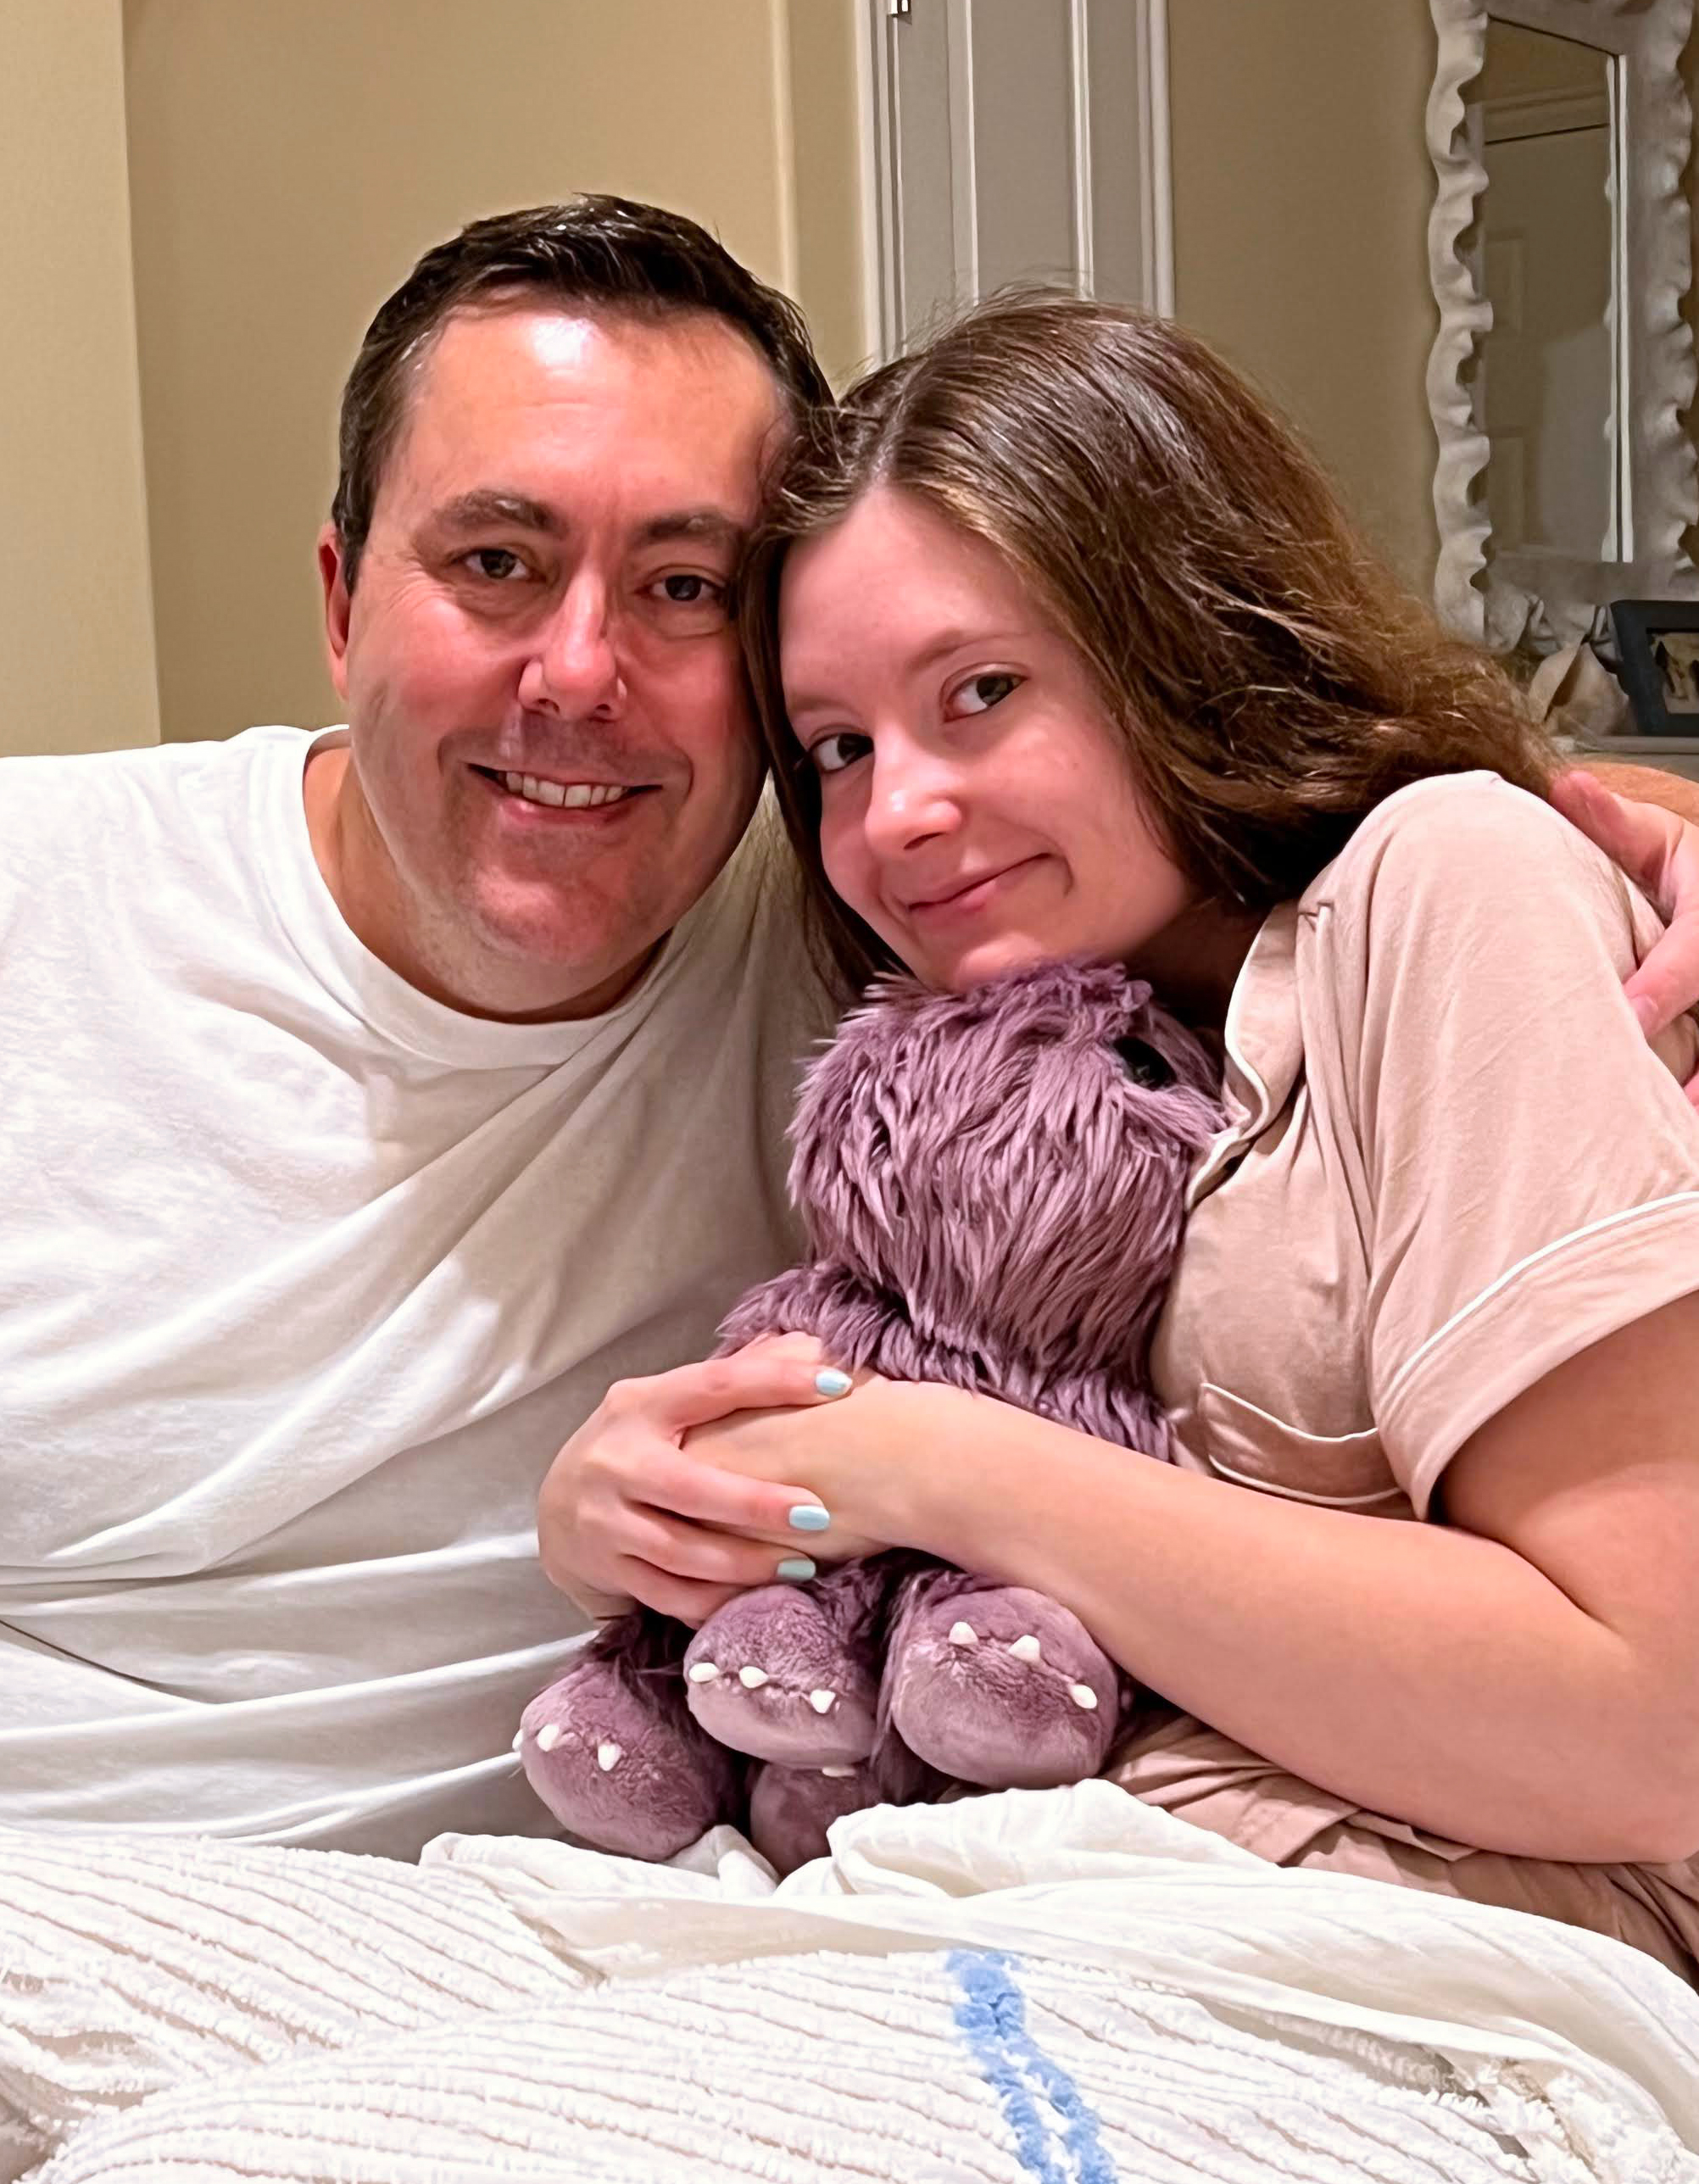 A photo of Isabella McDonald sitting next to her father while holding a stuffed animal.